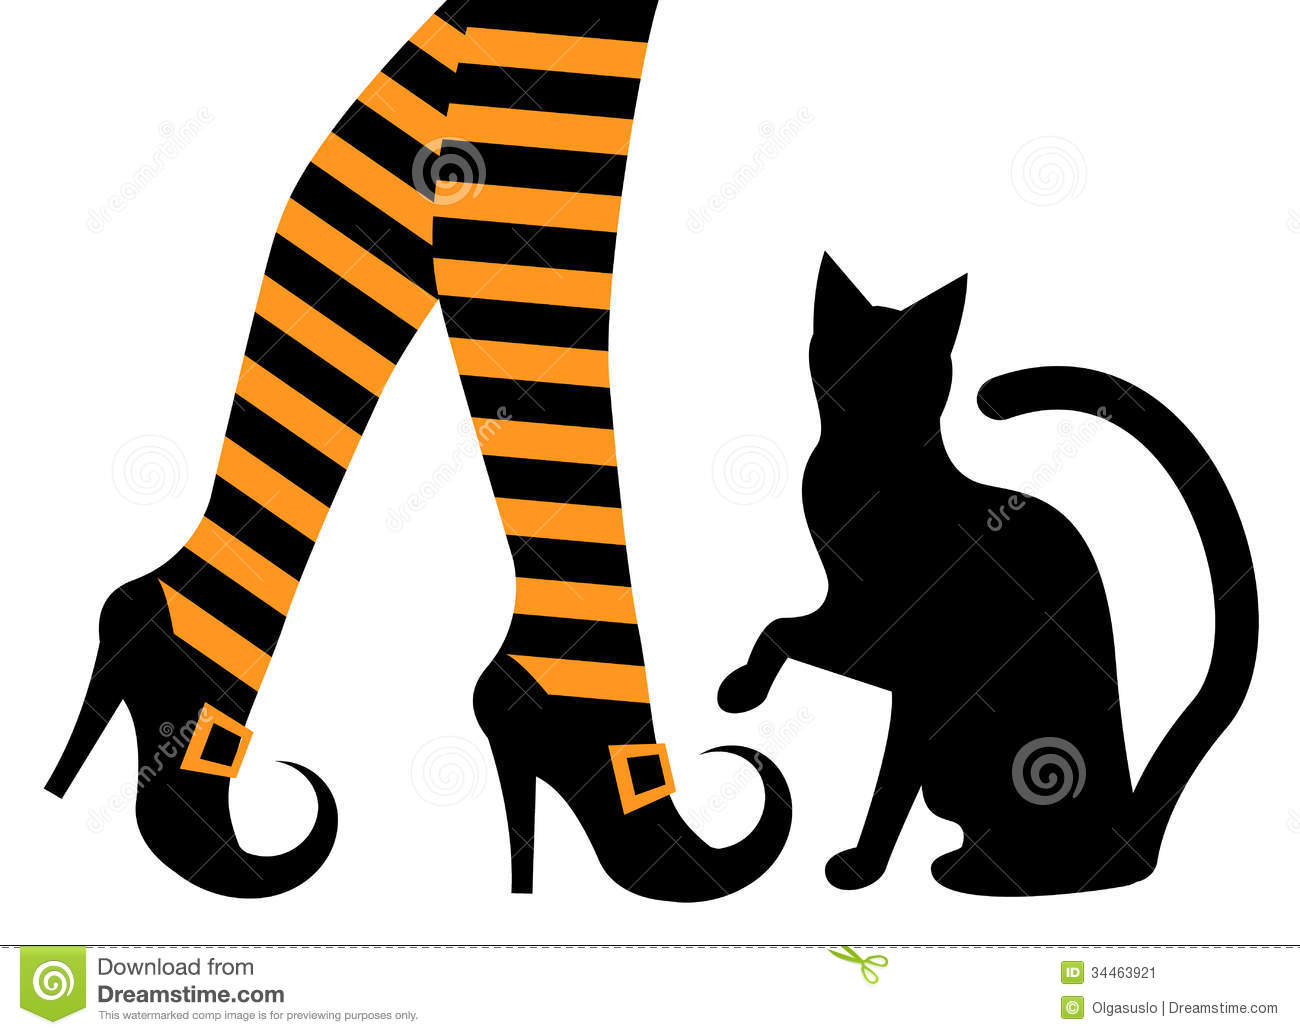 Witches Feet In Shoes And A Black Cat Stock Image   Image  34463921